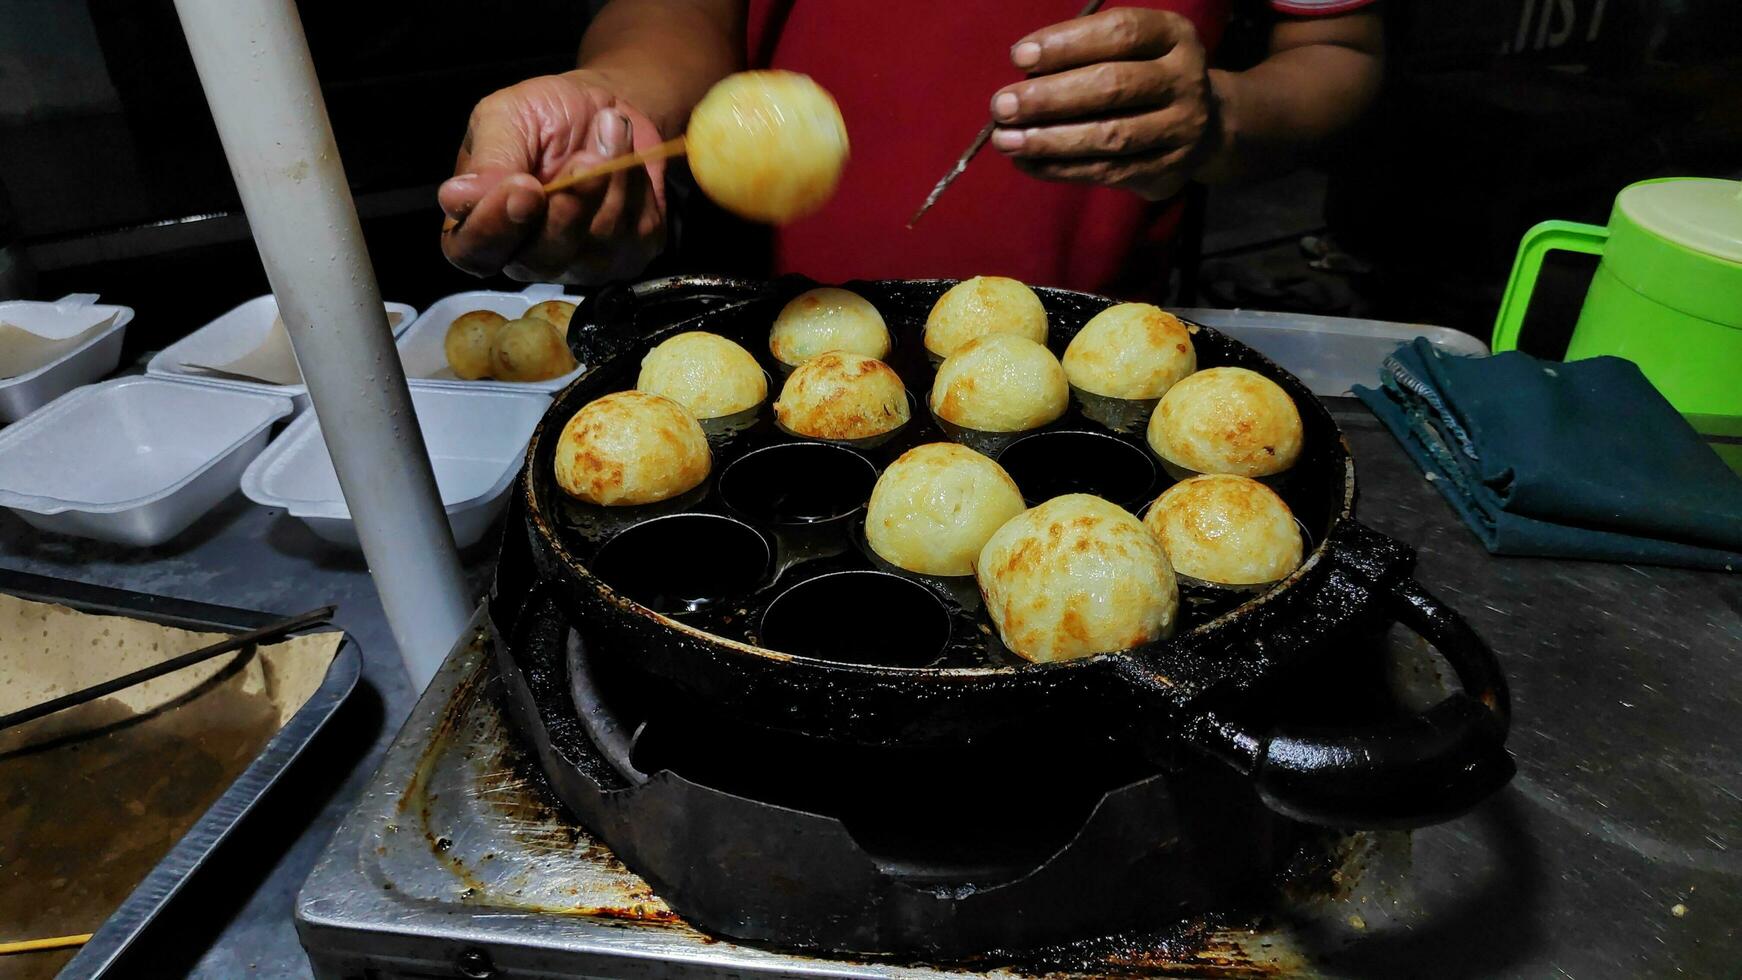 Process to cooking takoyaki most popular delicious snack photo